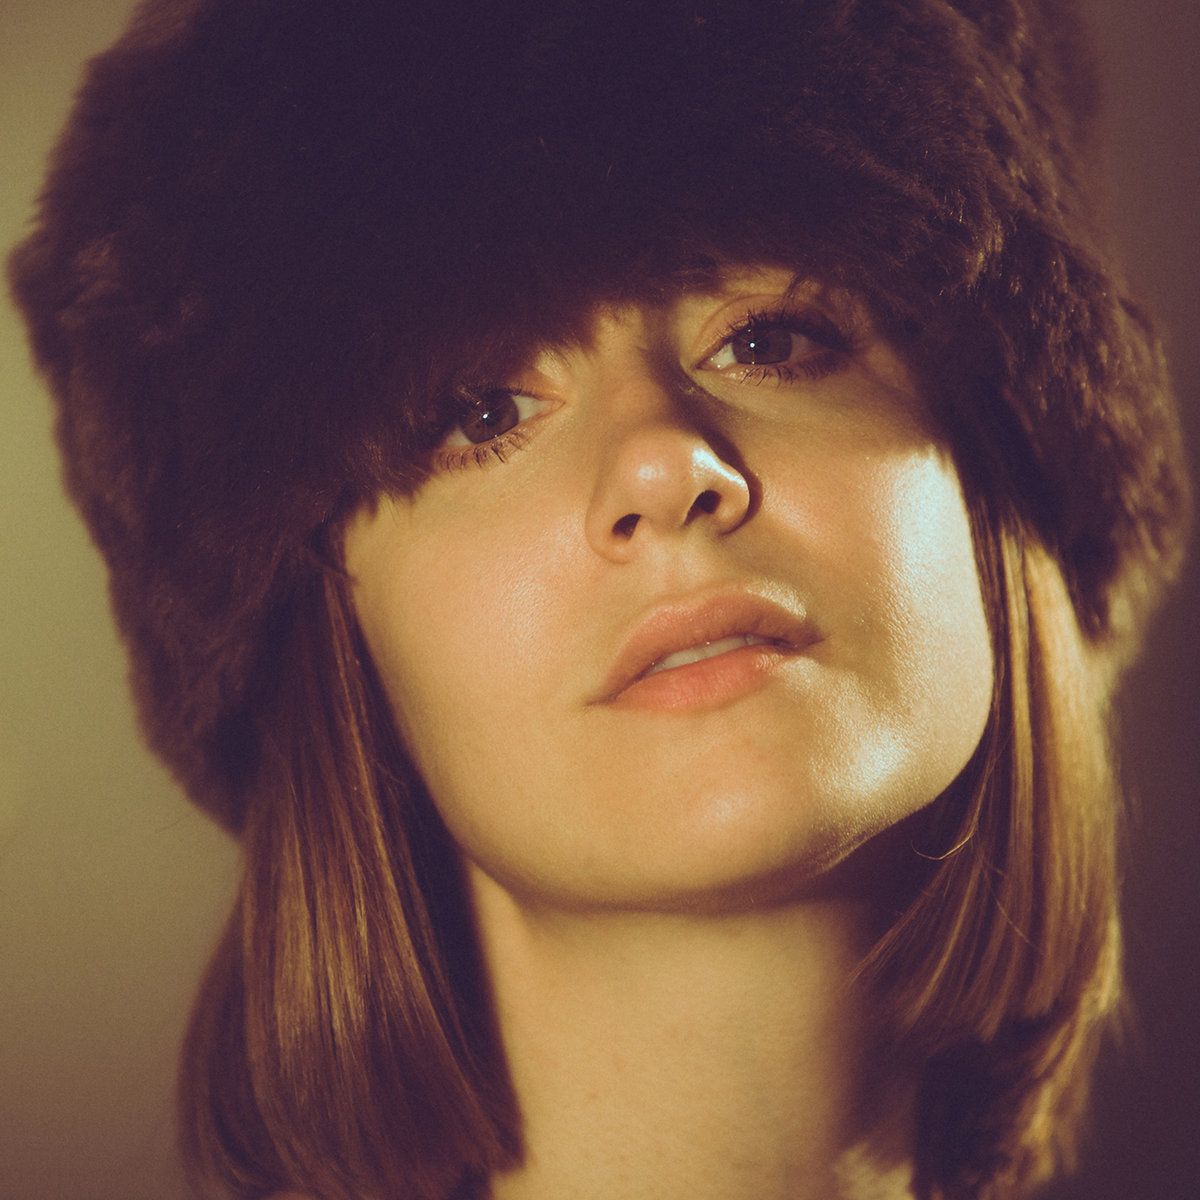 Laura Stevenson gets under your skin with ‘The Big Freeze’